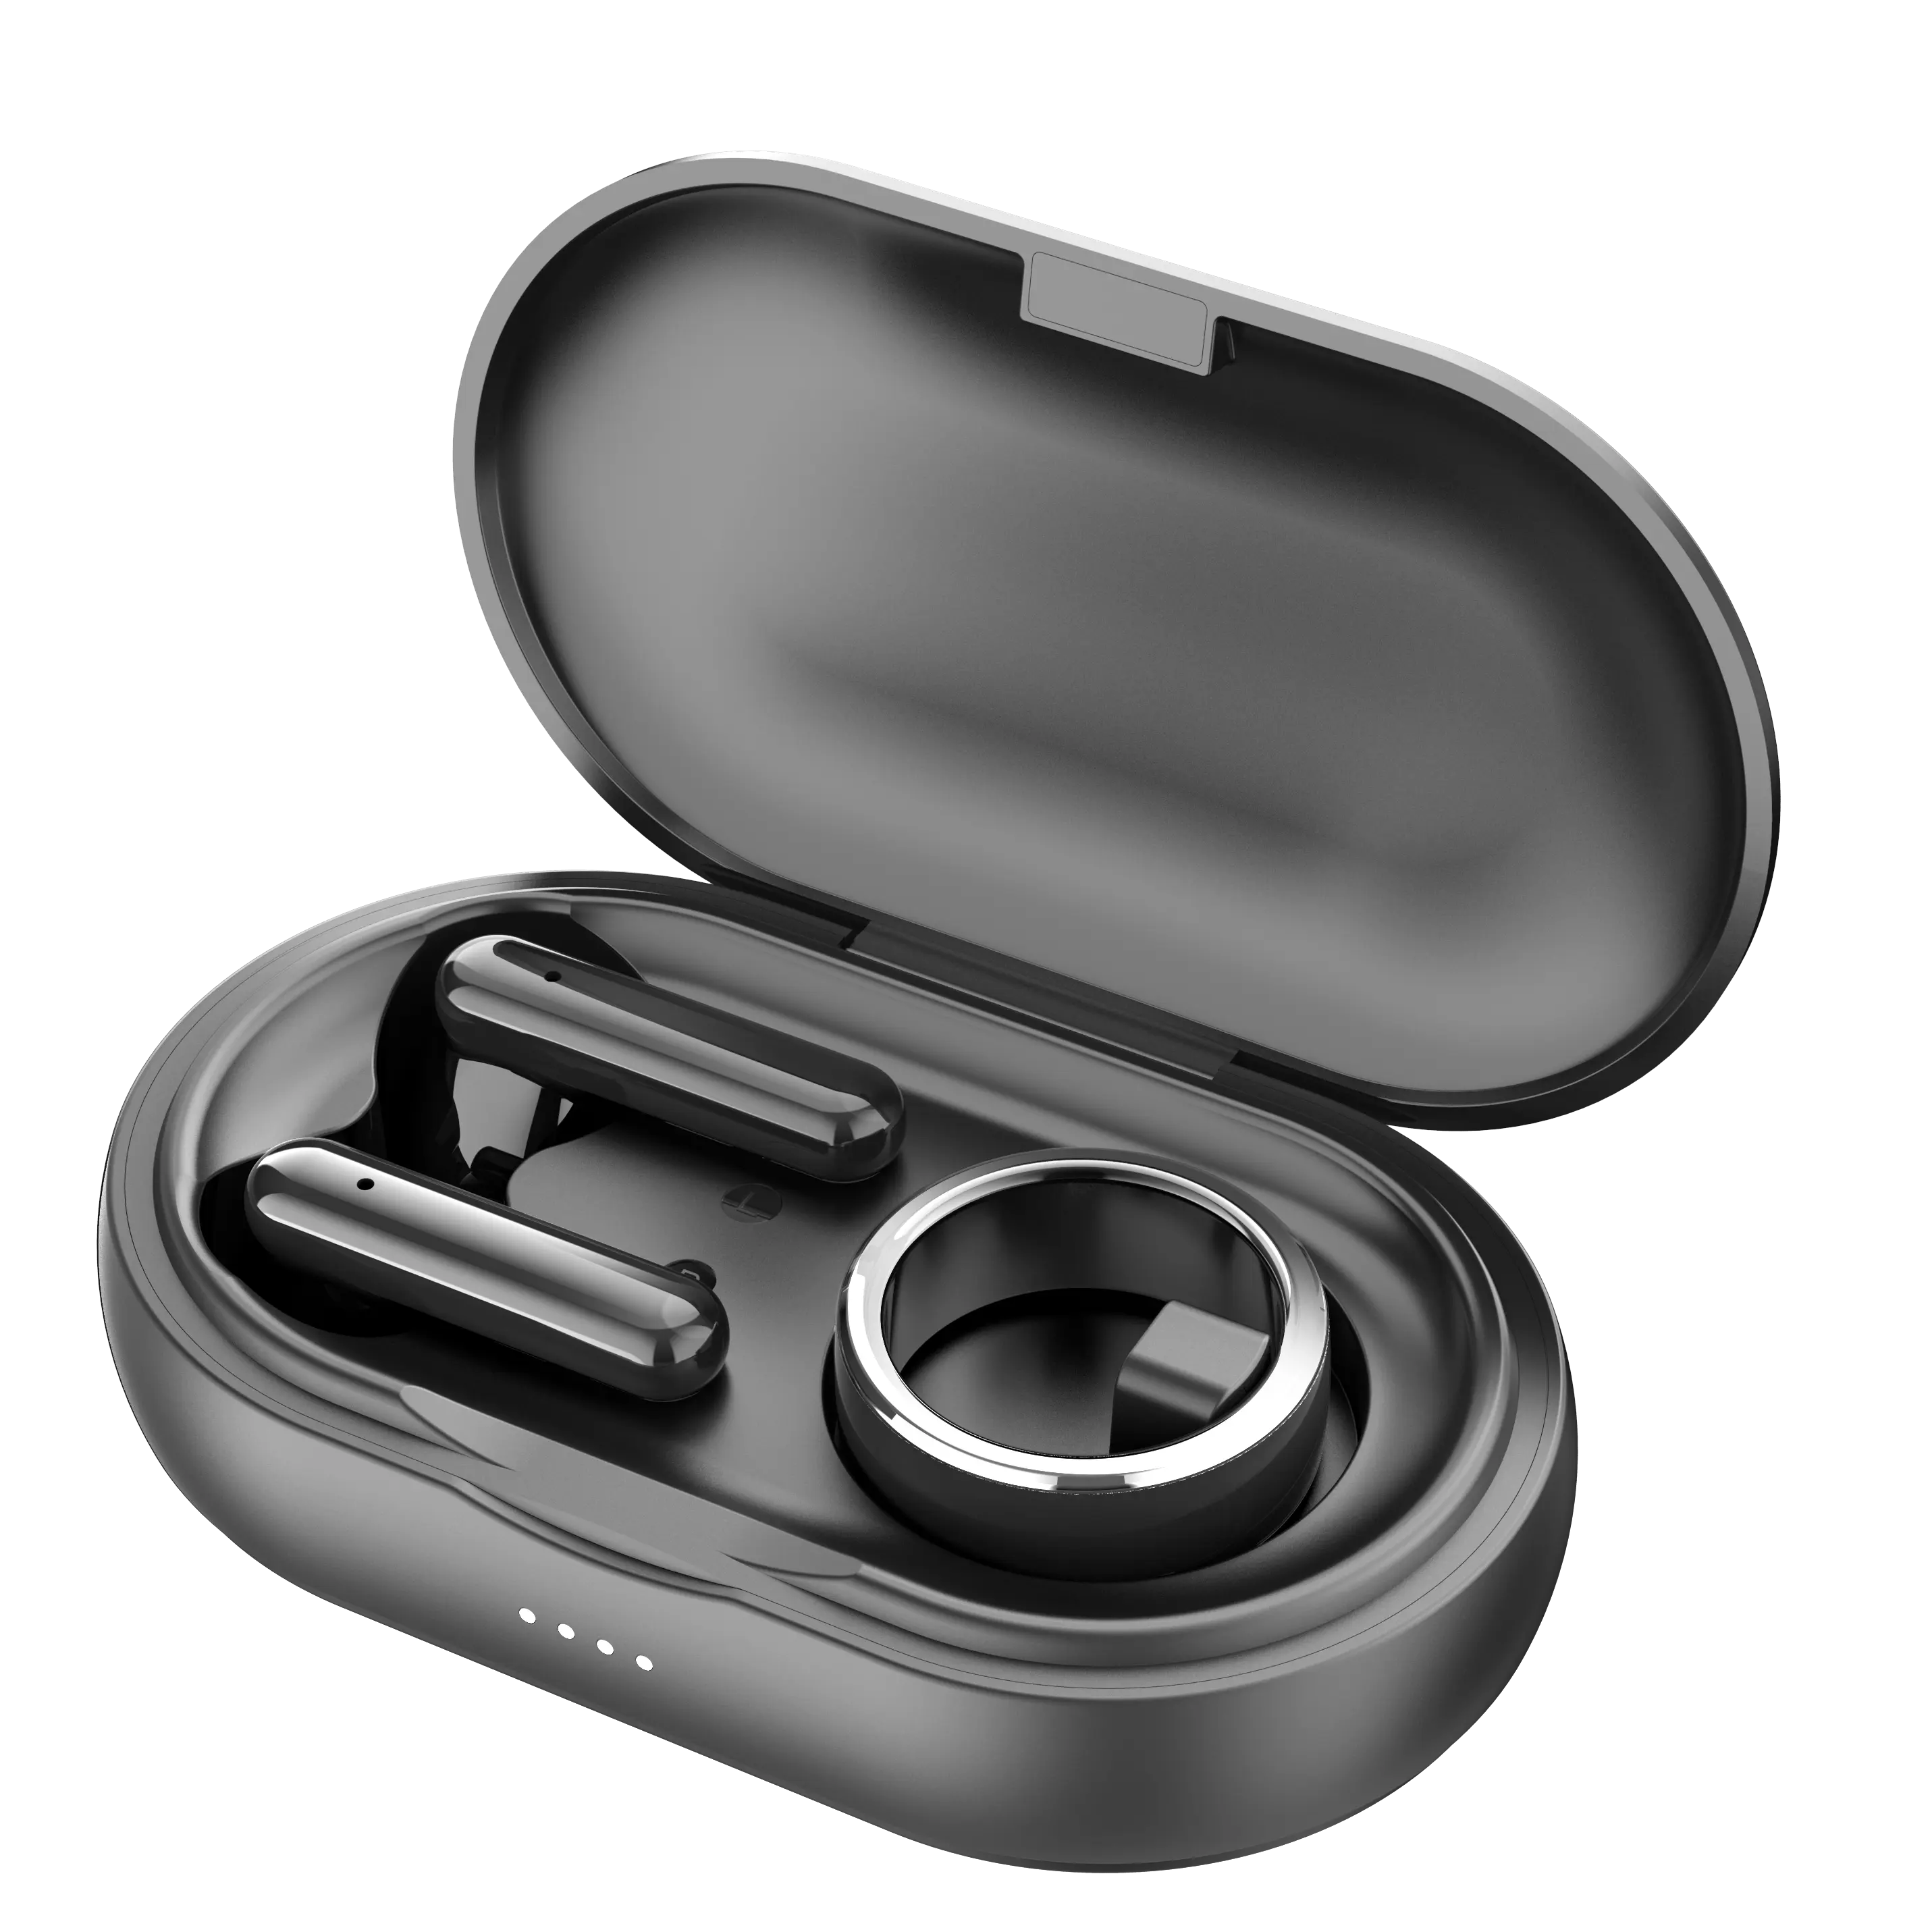 2 IN 1 smart ring IPX7 waterproof health tracker smart ring with charging box bluetooth TWS earbuds combo